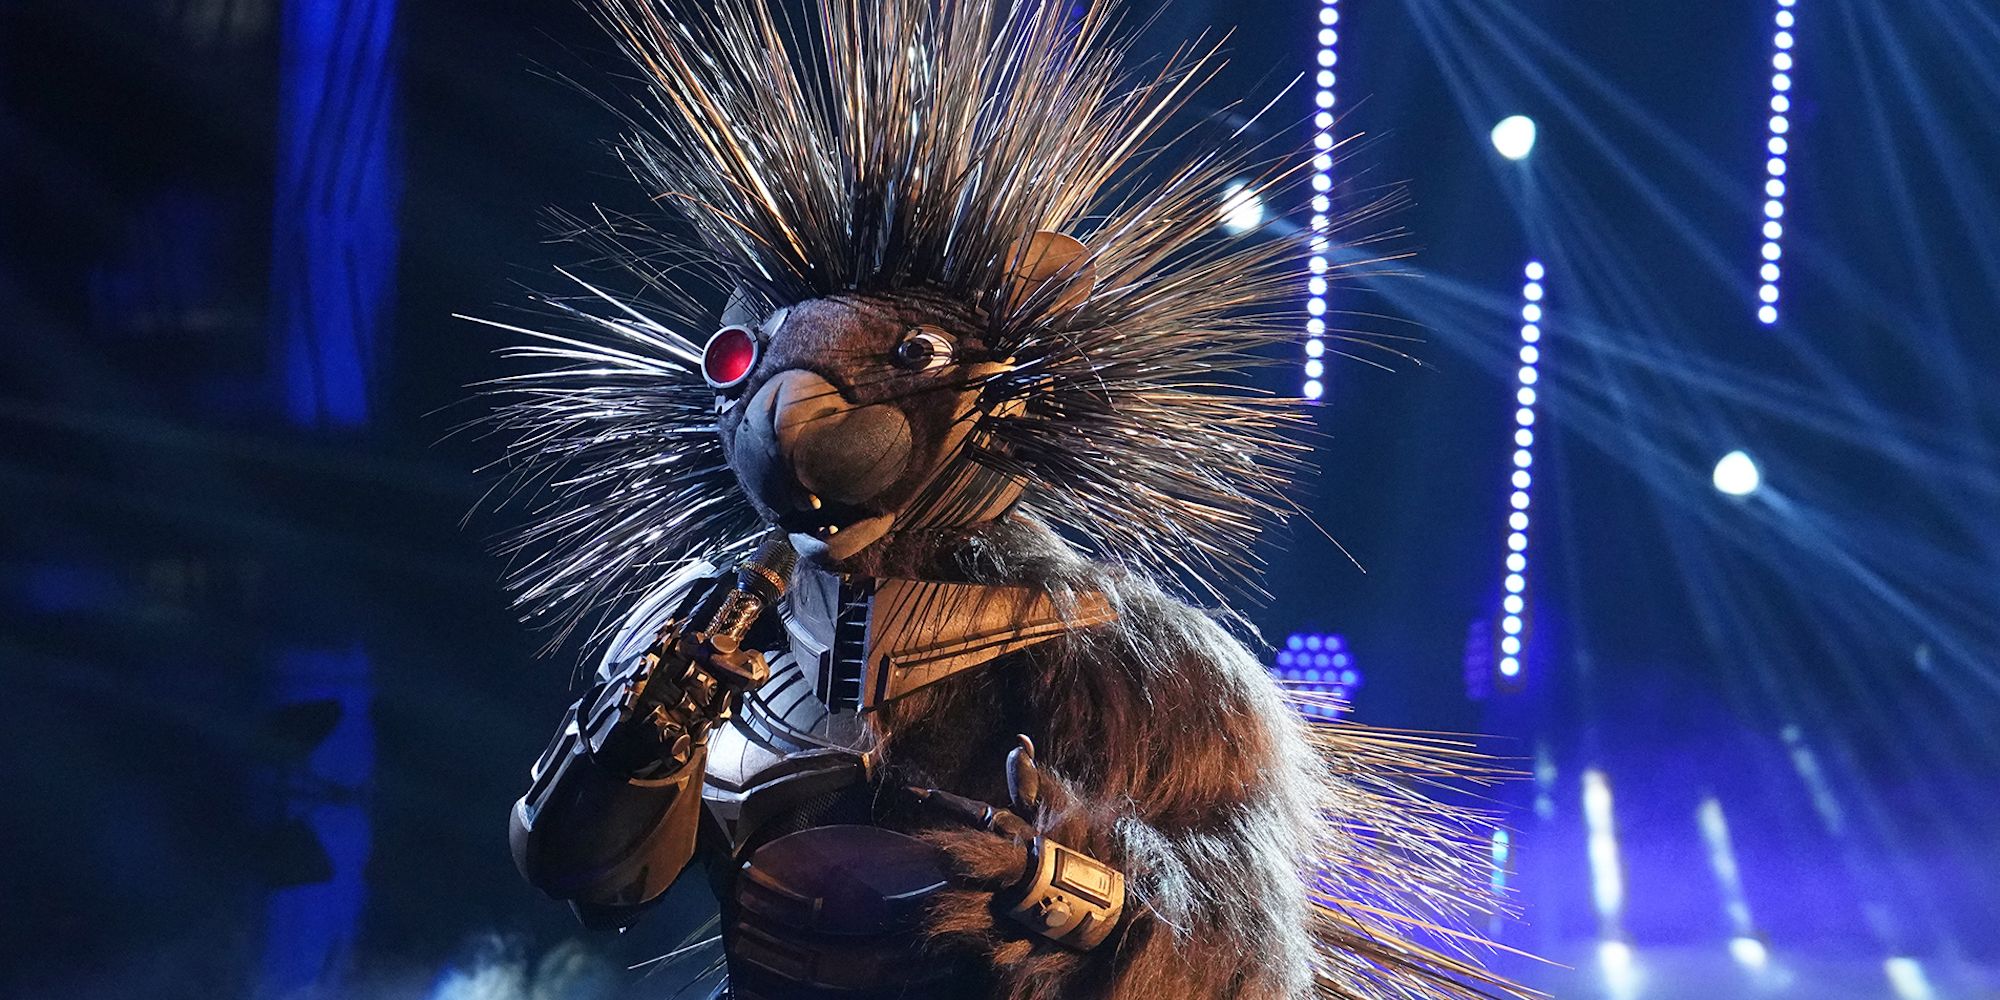 Robopine performing on The Masked Singer